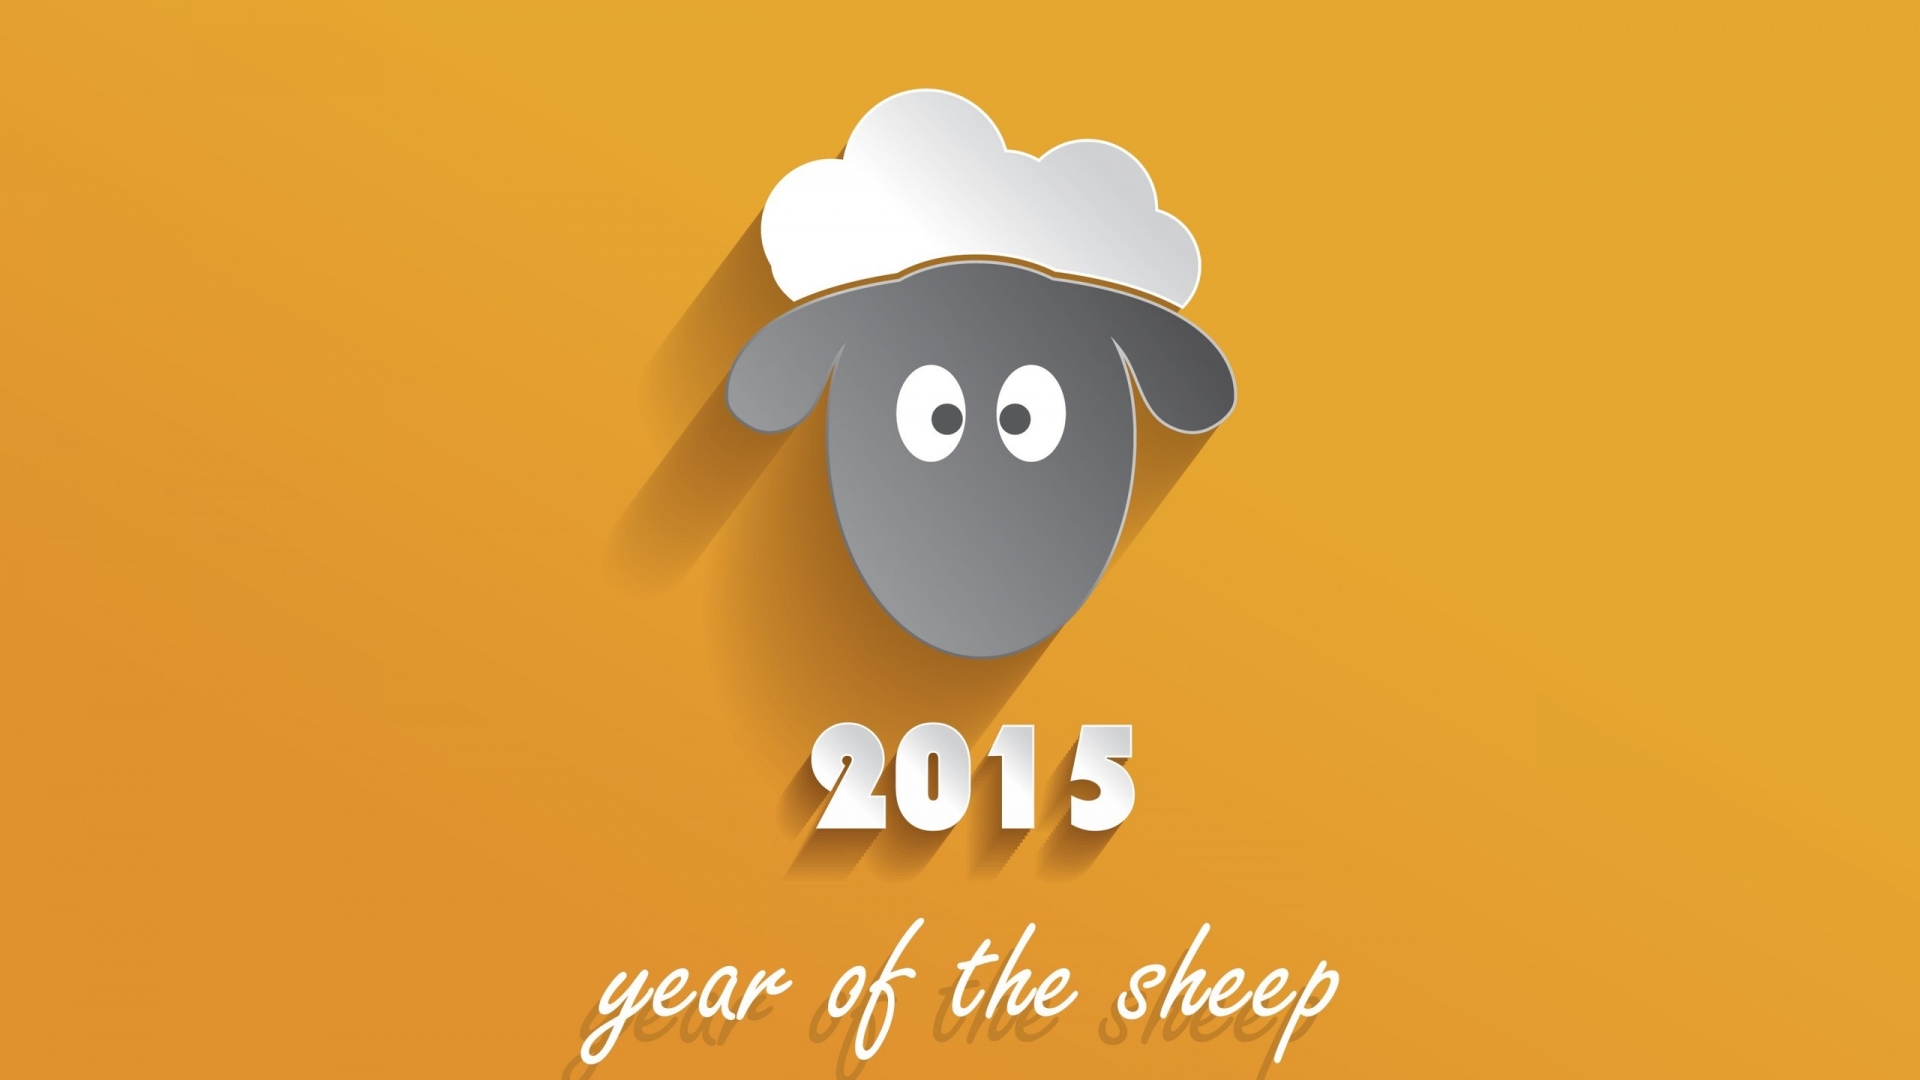 2015 Year of the Sheep for 1920 x 1080 HDTV 1080p resolution